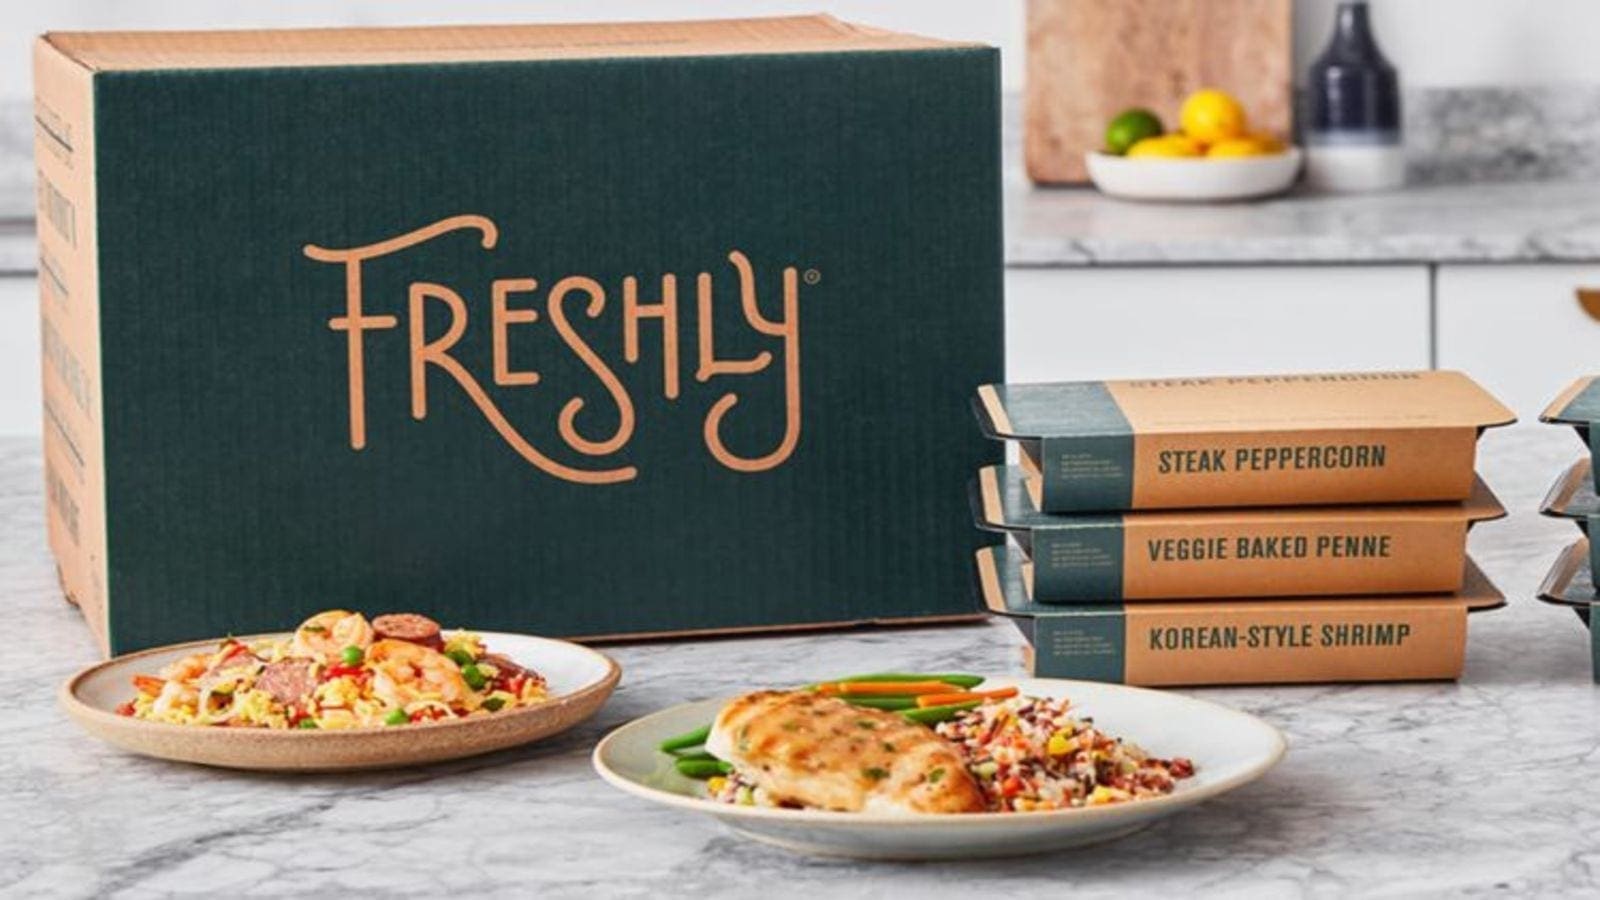 Nestlé buys US meal delivery company Freshly to bolster its better-for-you portfolio